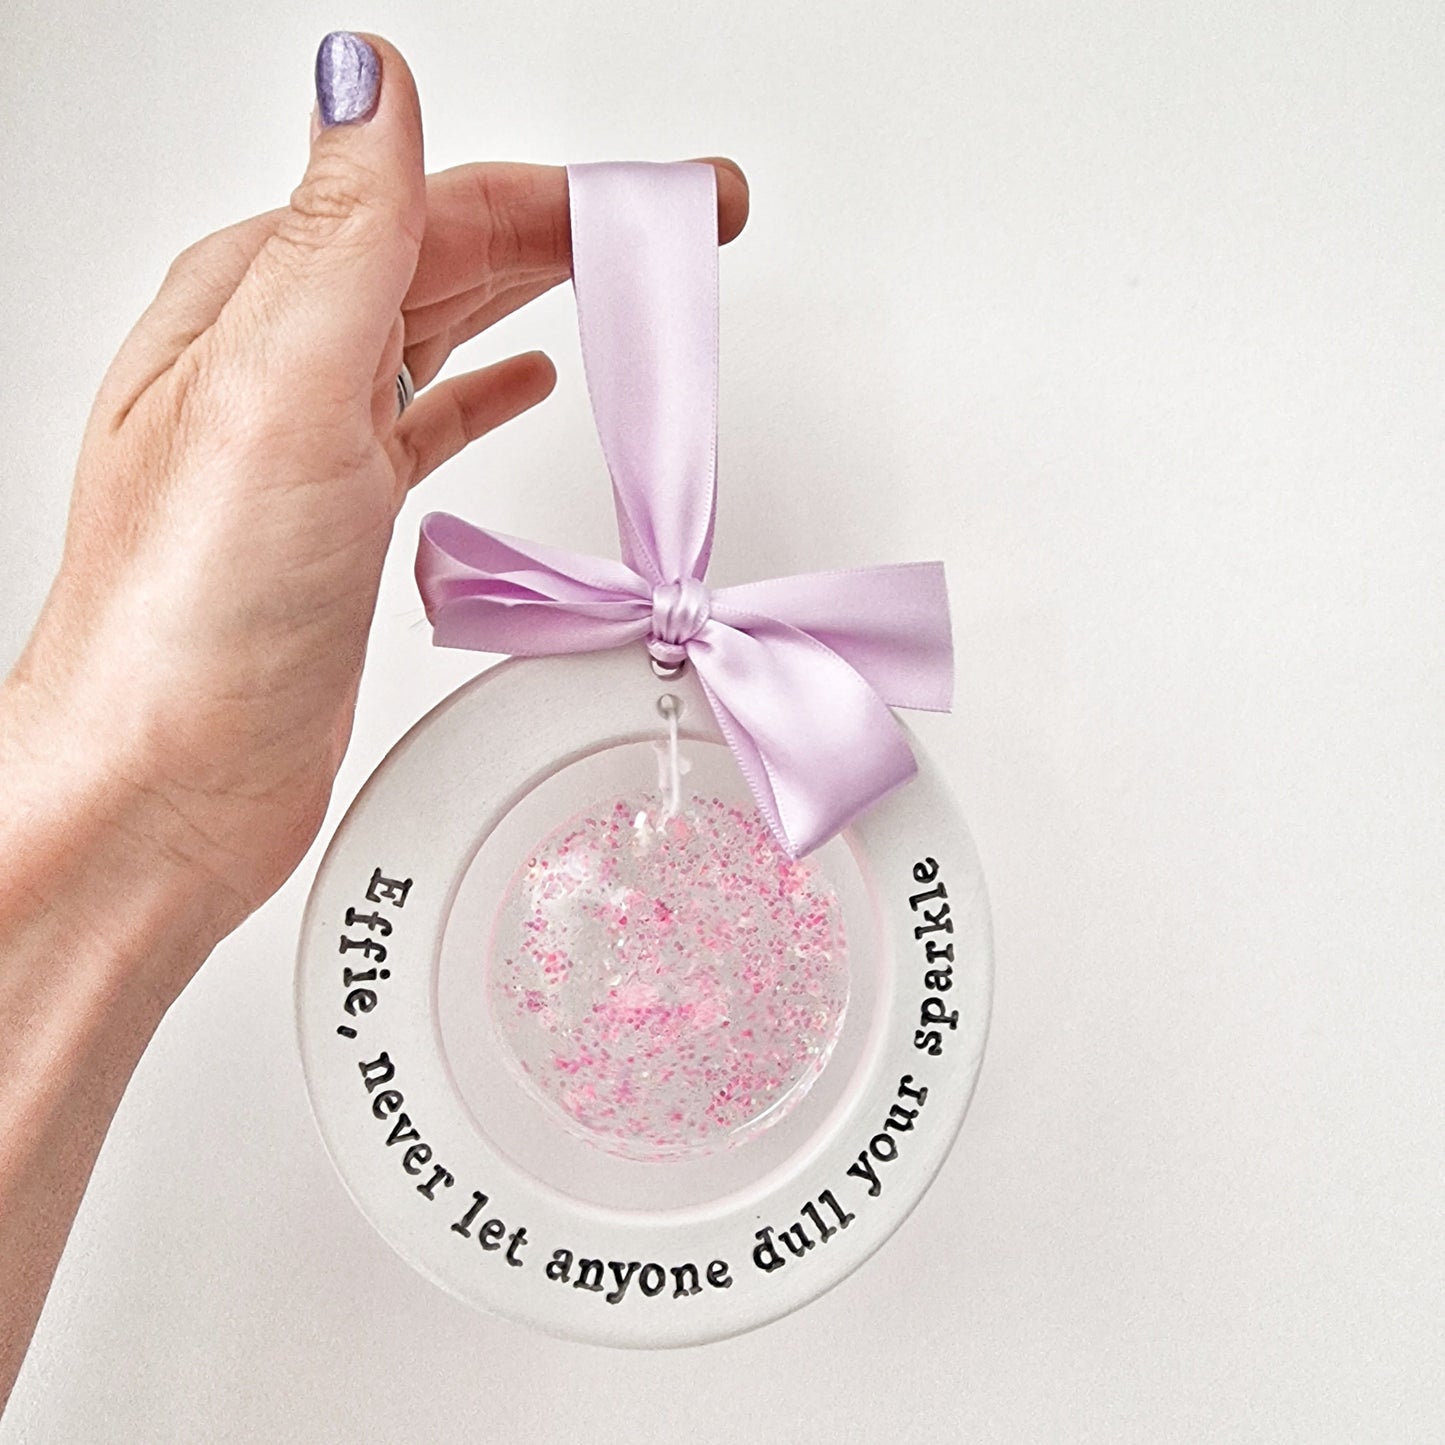 Dull your sparkle hanging decoration